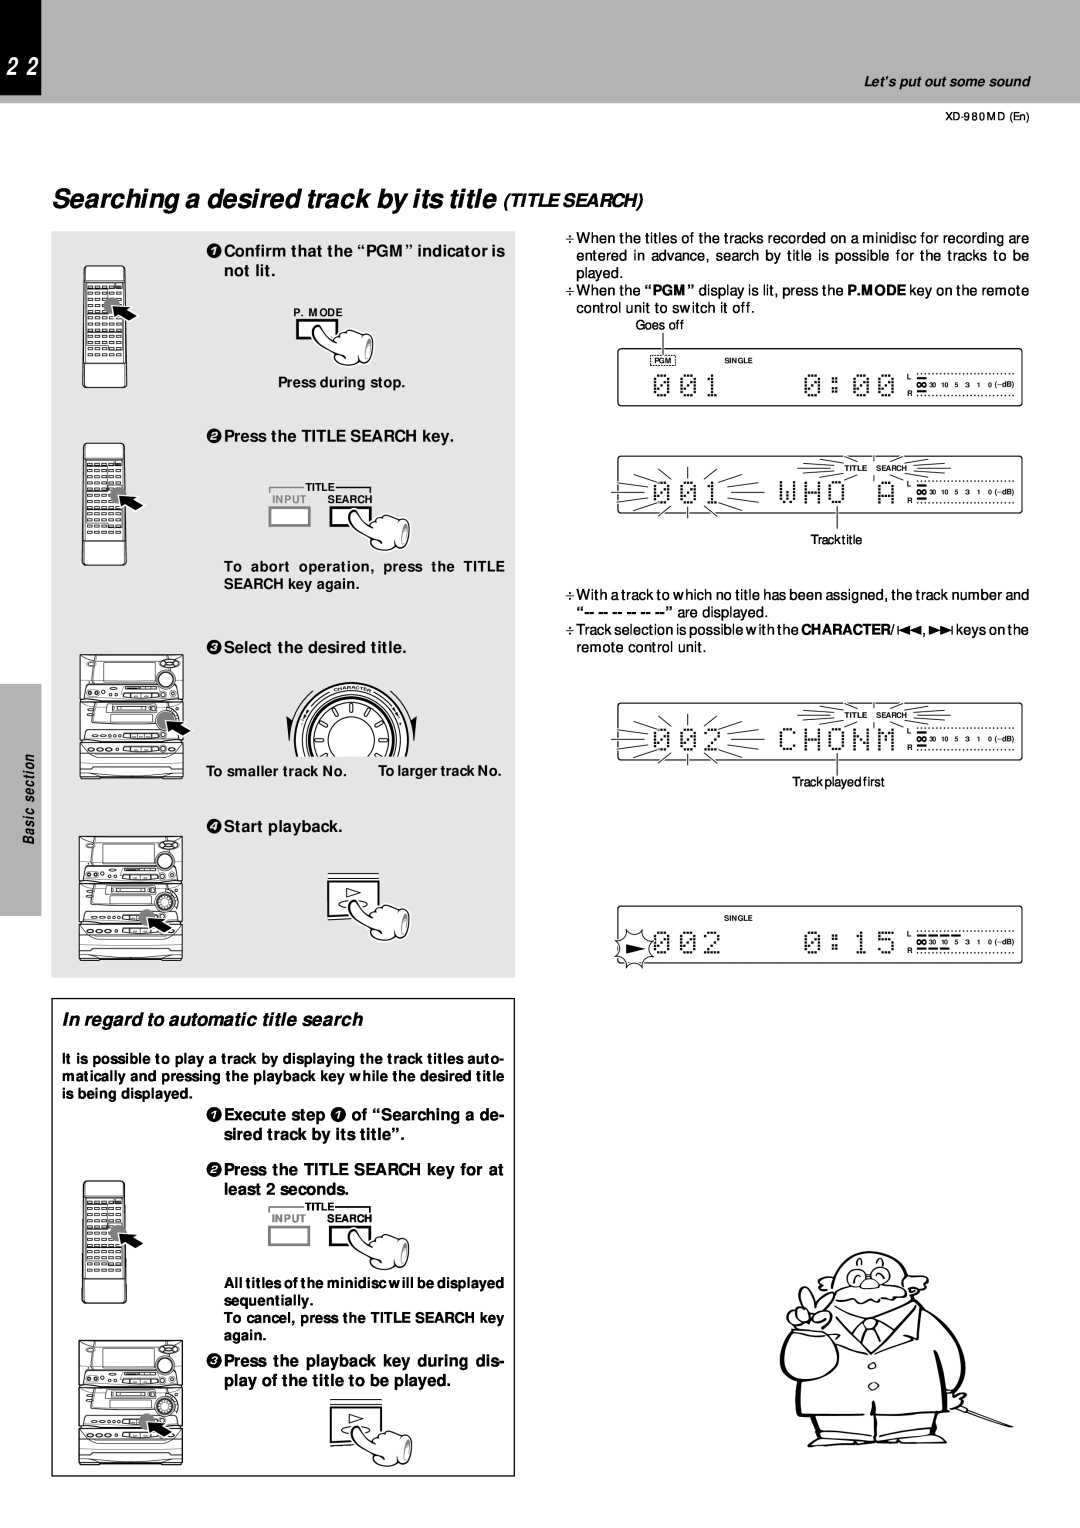 Kenwood XD-980MD instruction manual W H O, C H O N M, 0 : 1, In regard to automatic title search, 0 : 0, Press during stop 